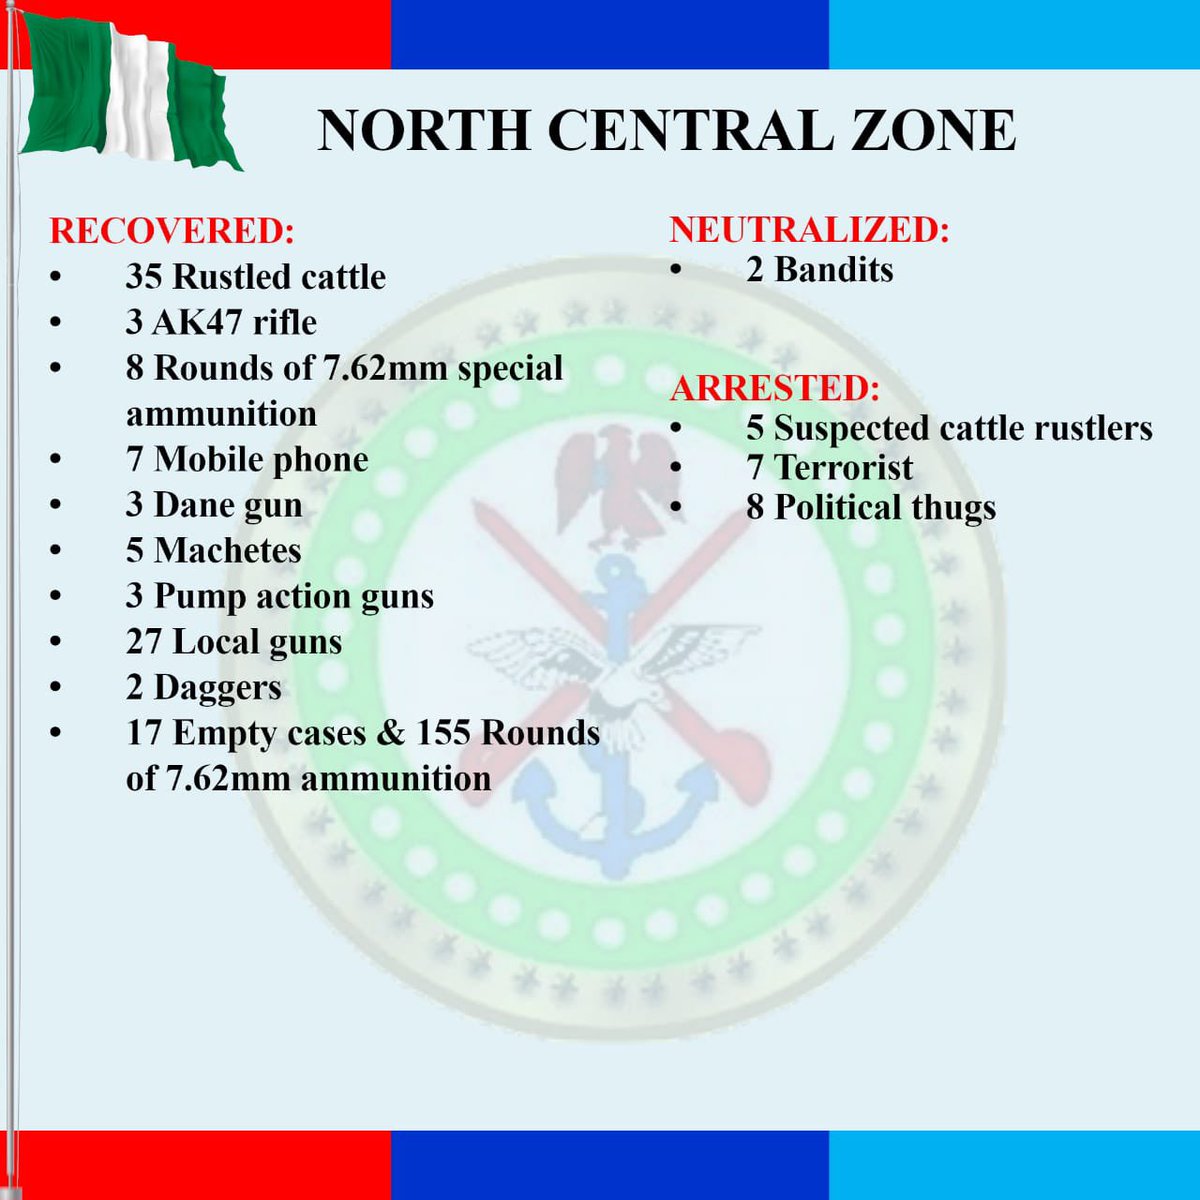 #Dhqupdate: During the quick #Pressbriefing the summary of the Armed Forces of Nigeria's Military Operations were given on 9th March 2023

Get the full details here:  tinyurl.com/3xt94xw7

Support Our Troops
#NigeriaDecides2023